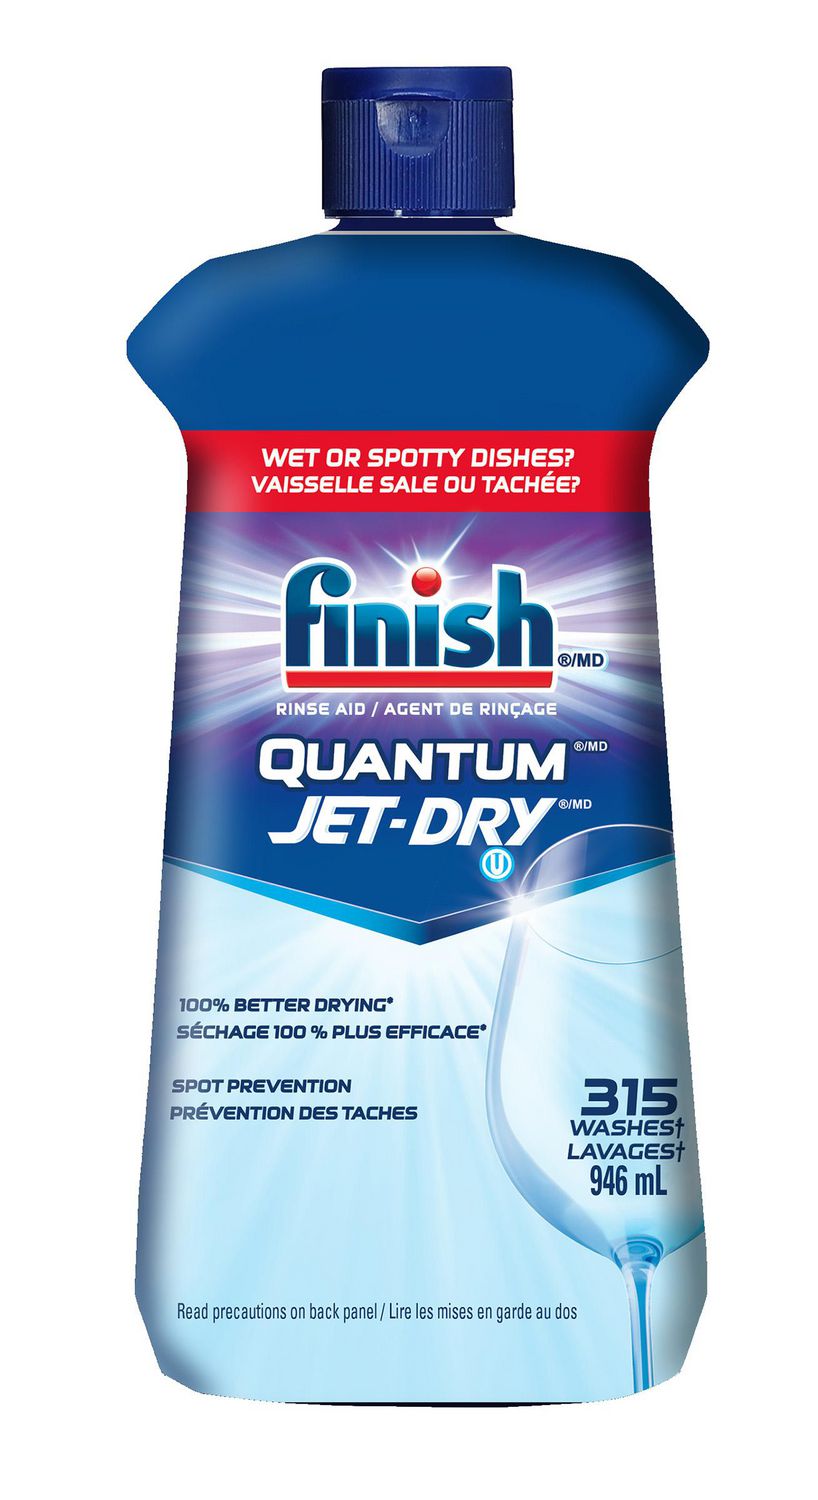 Has anyone used JetDry when rinsing your truck?